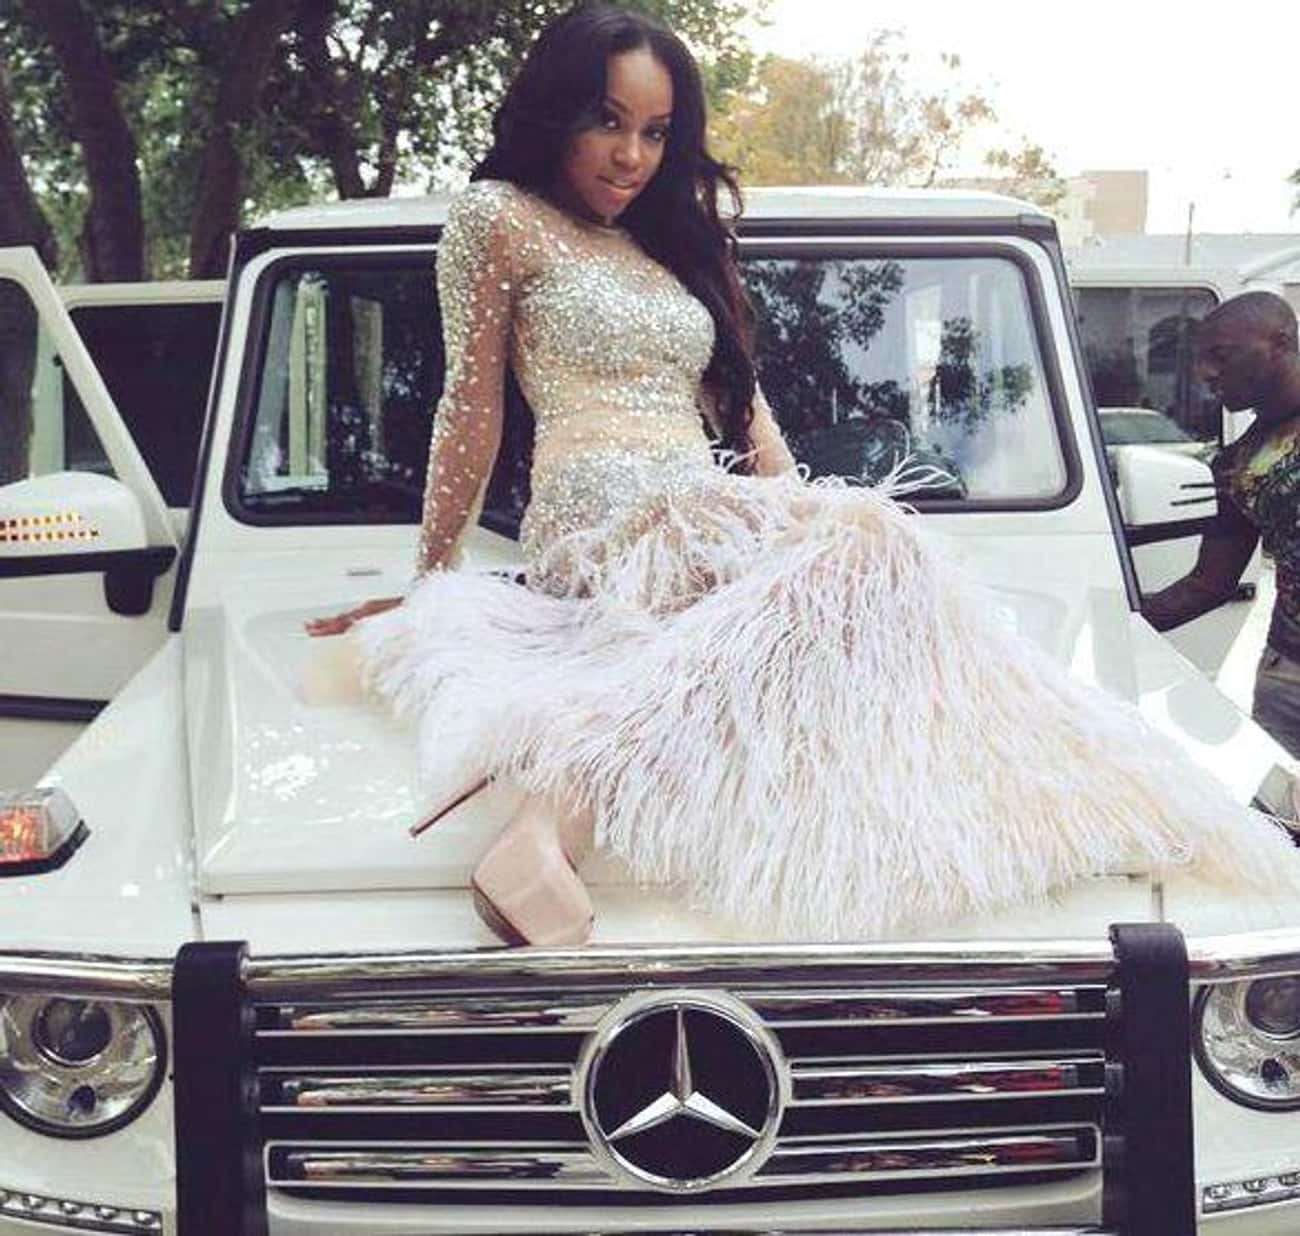 When Your Dress Matches Your Sweet Ride